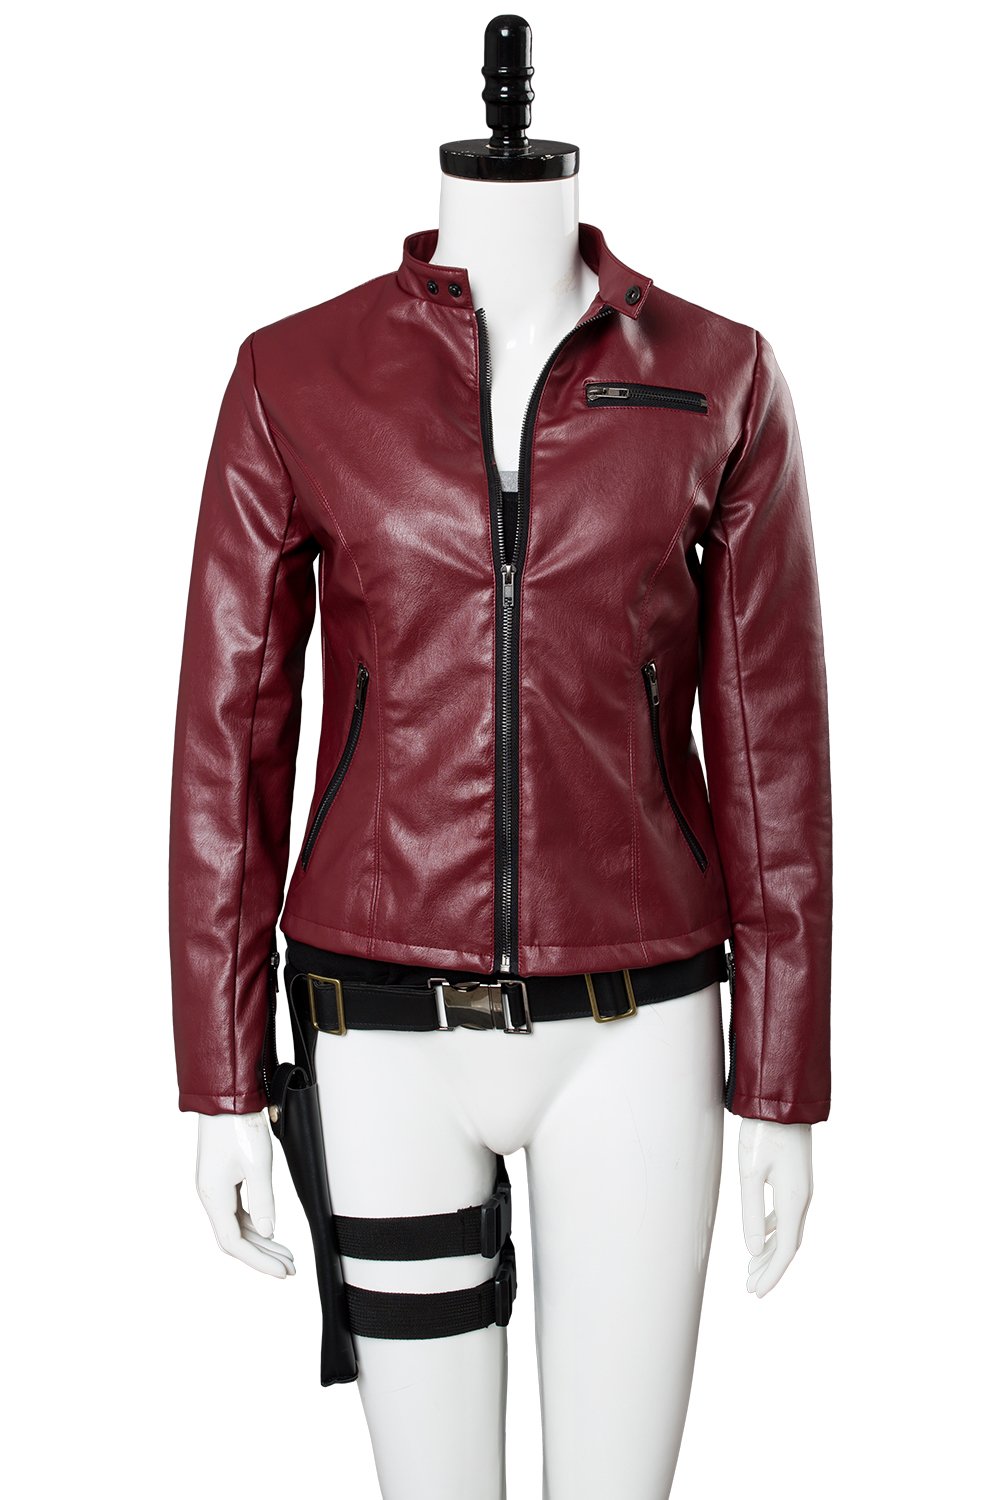 Resident Evil 2 Claire Redfield Cosplay Costume